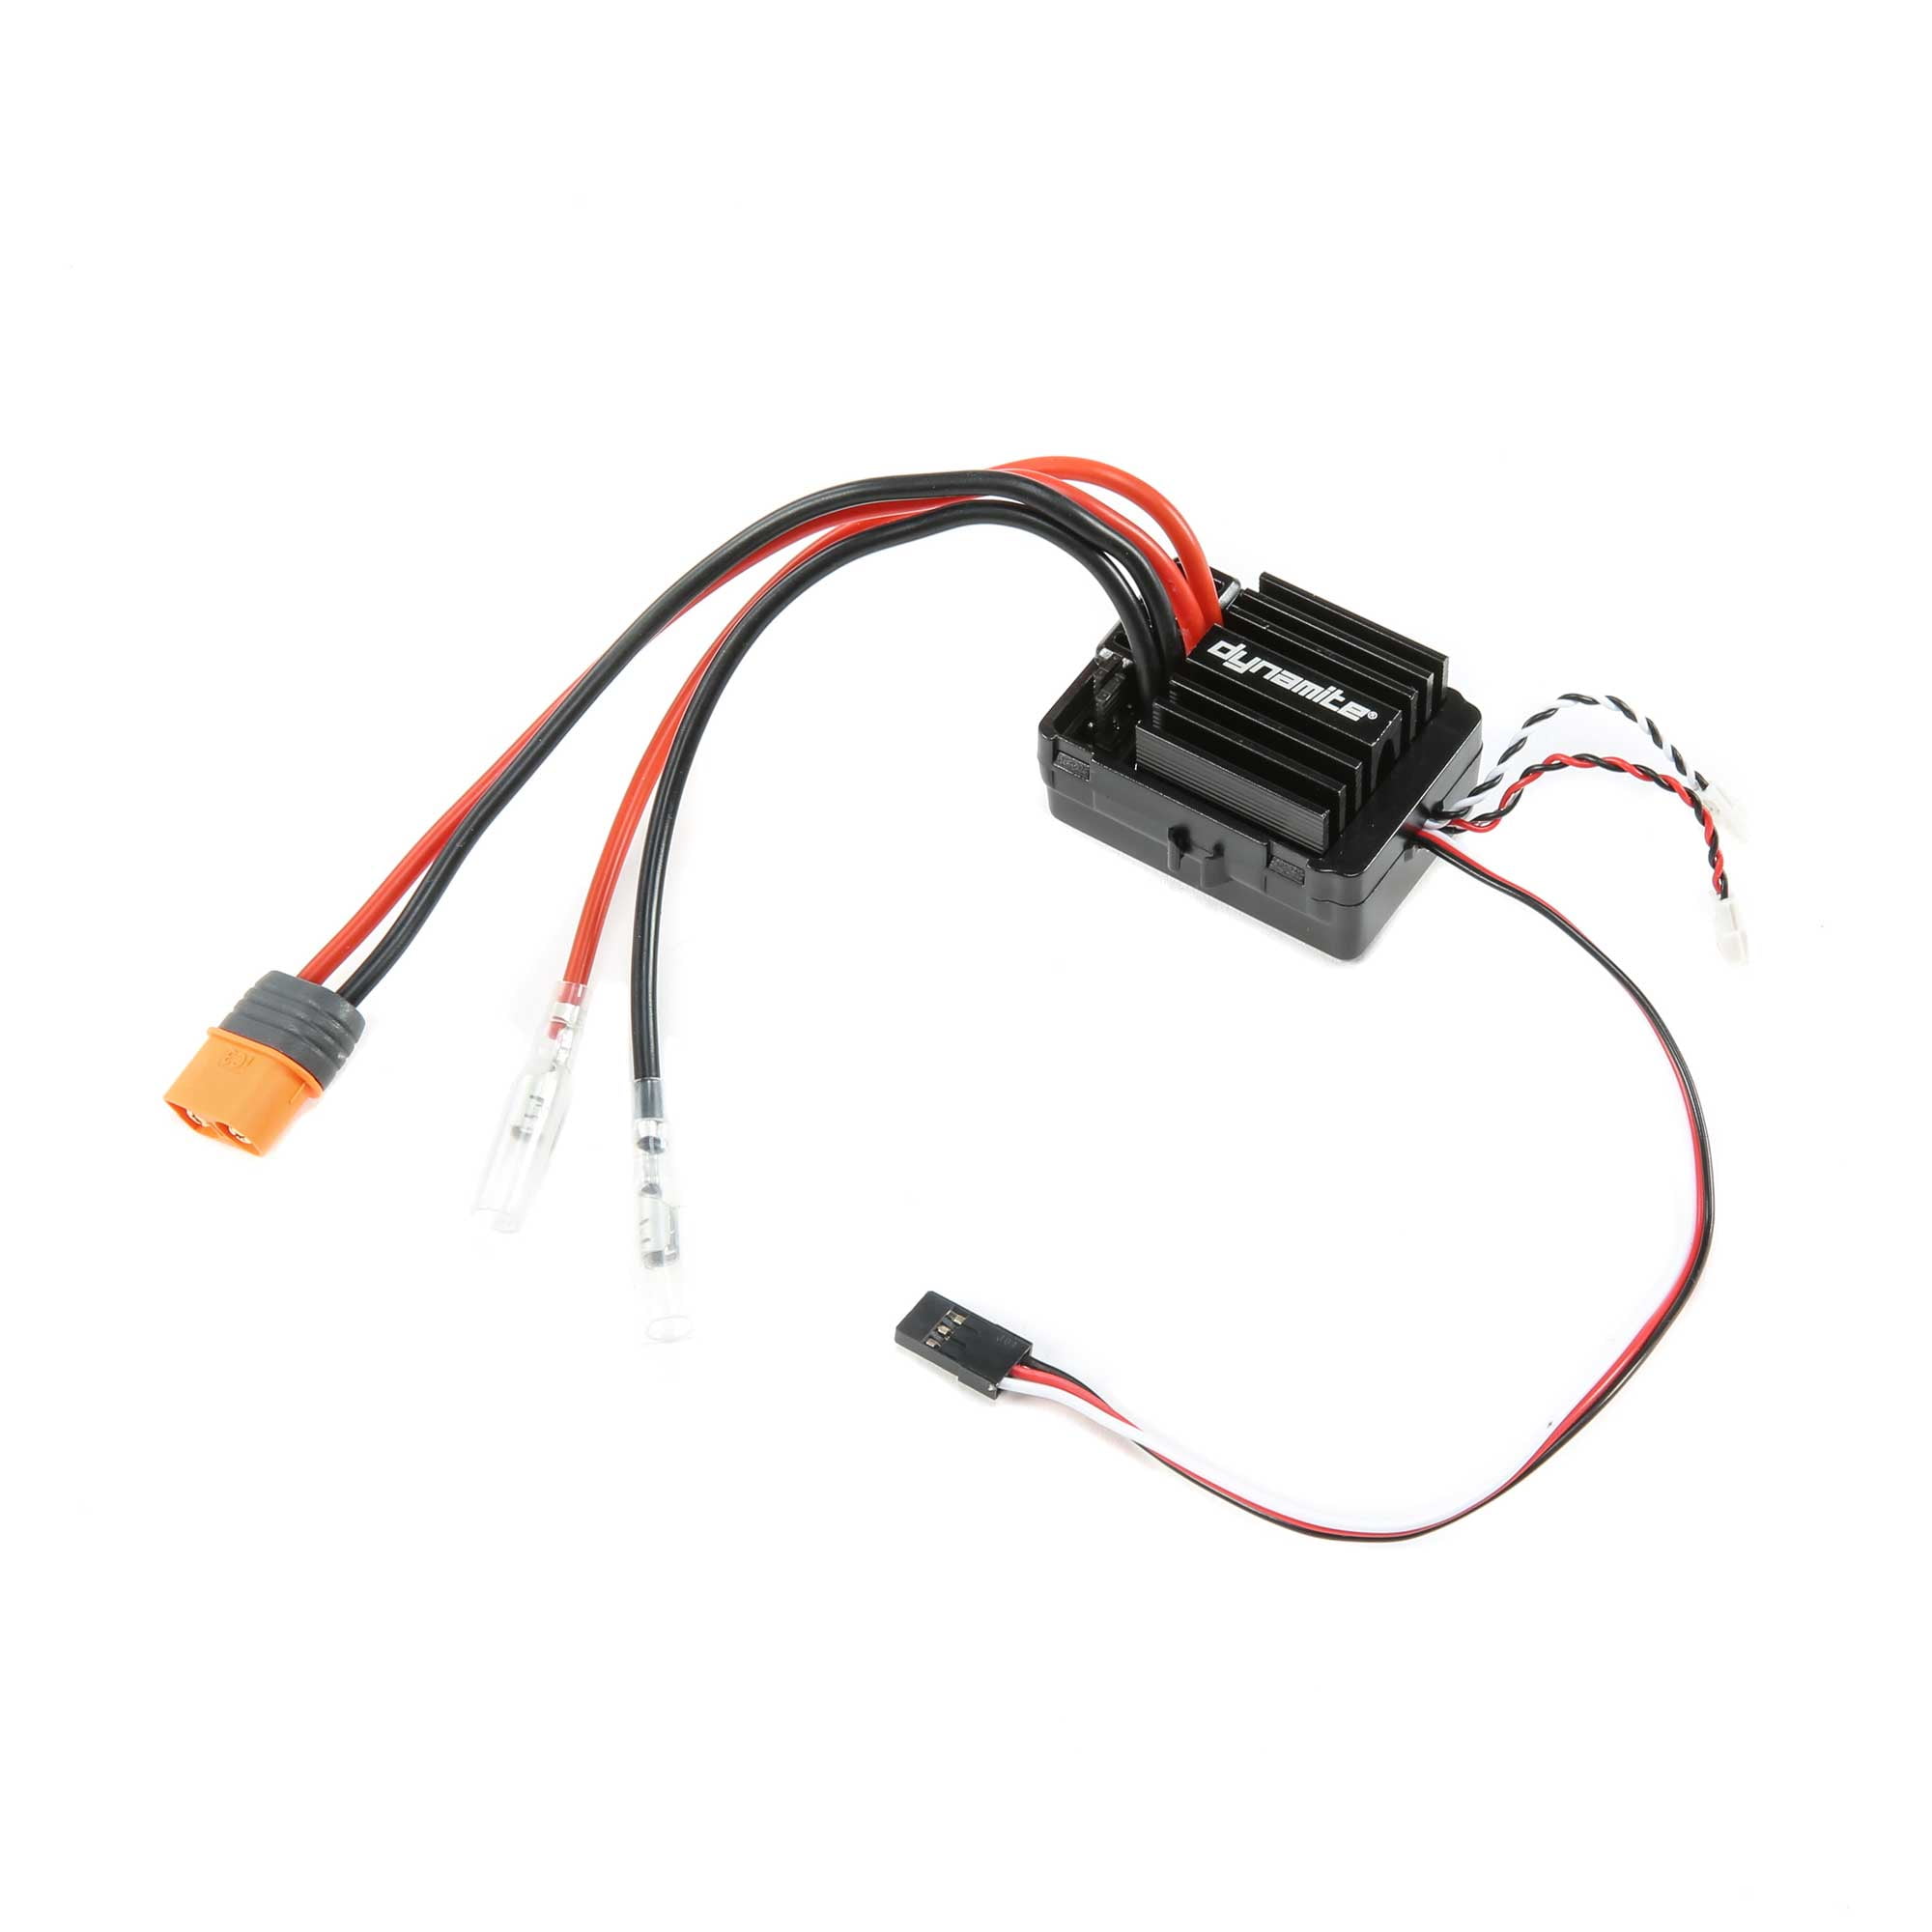 Dynamite Waterproof AE-5L Brushed ESC with LED Port Light IC3 DYNS2213 Car Speed Controls & Accessories - Walmart.com